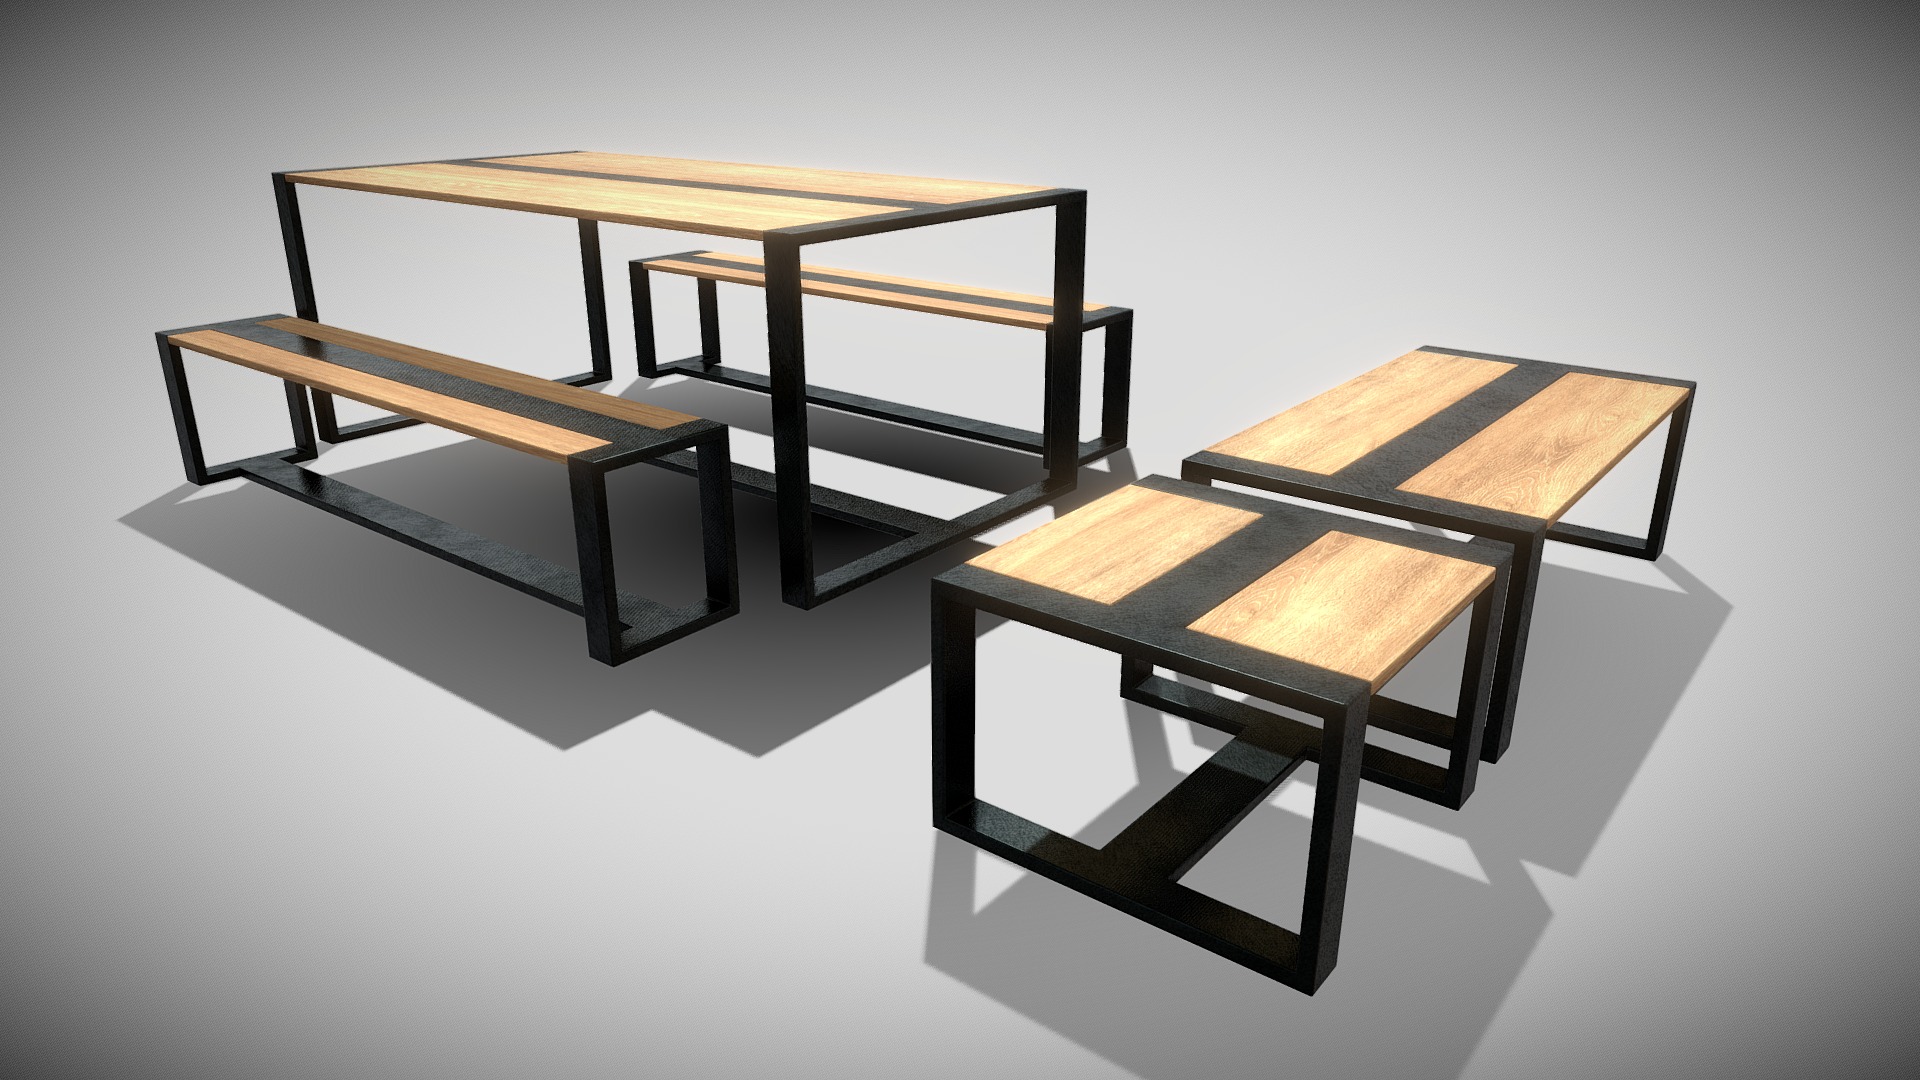 3D model Tables & Bench (Blend File, OBJ, DAE) - This is a 3D model of the Tables & Bench (Blend File, OBJ, DAE). The 3D model is about a couple of wooden tables.